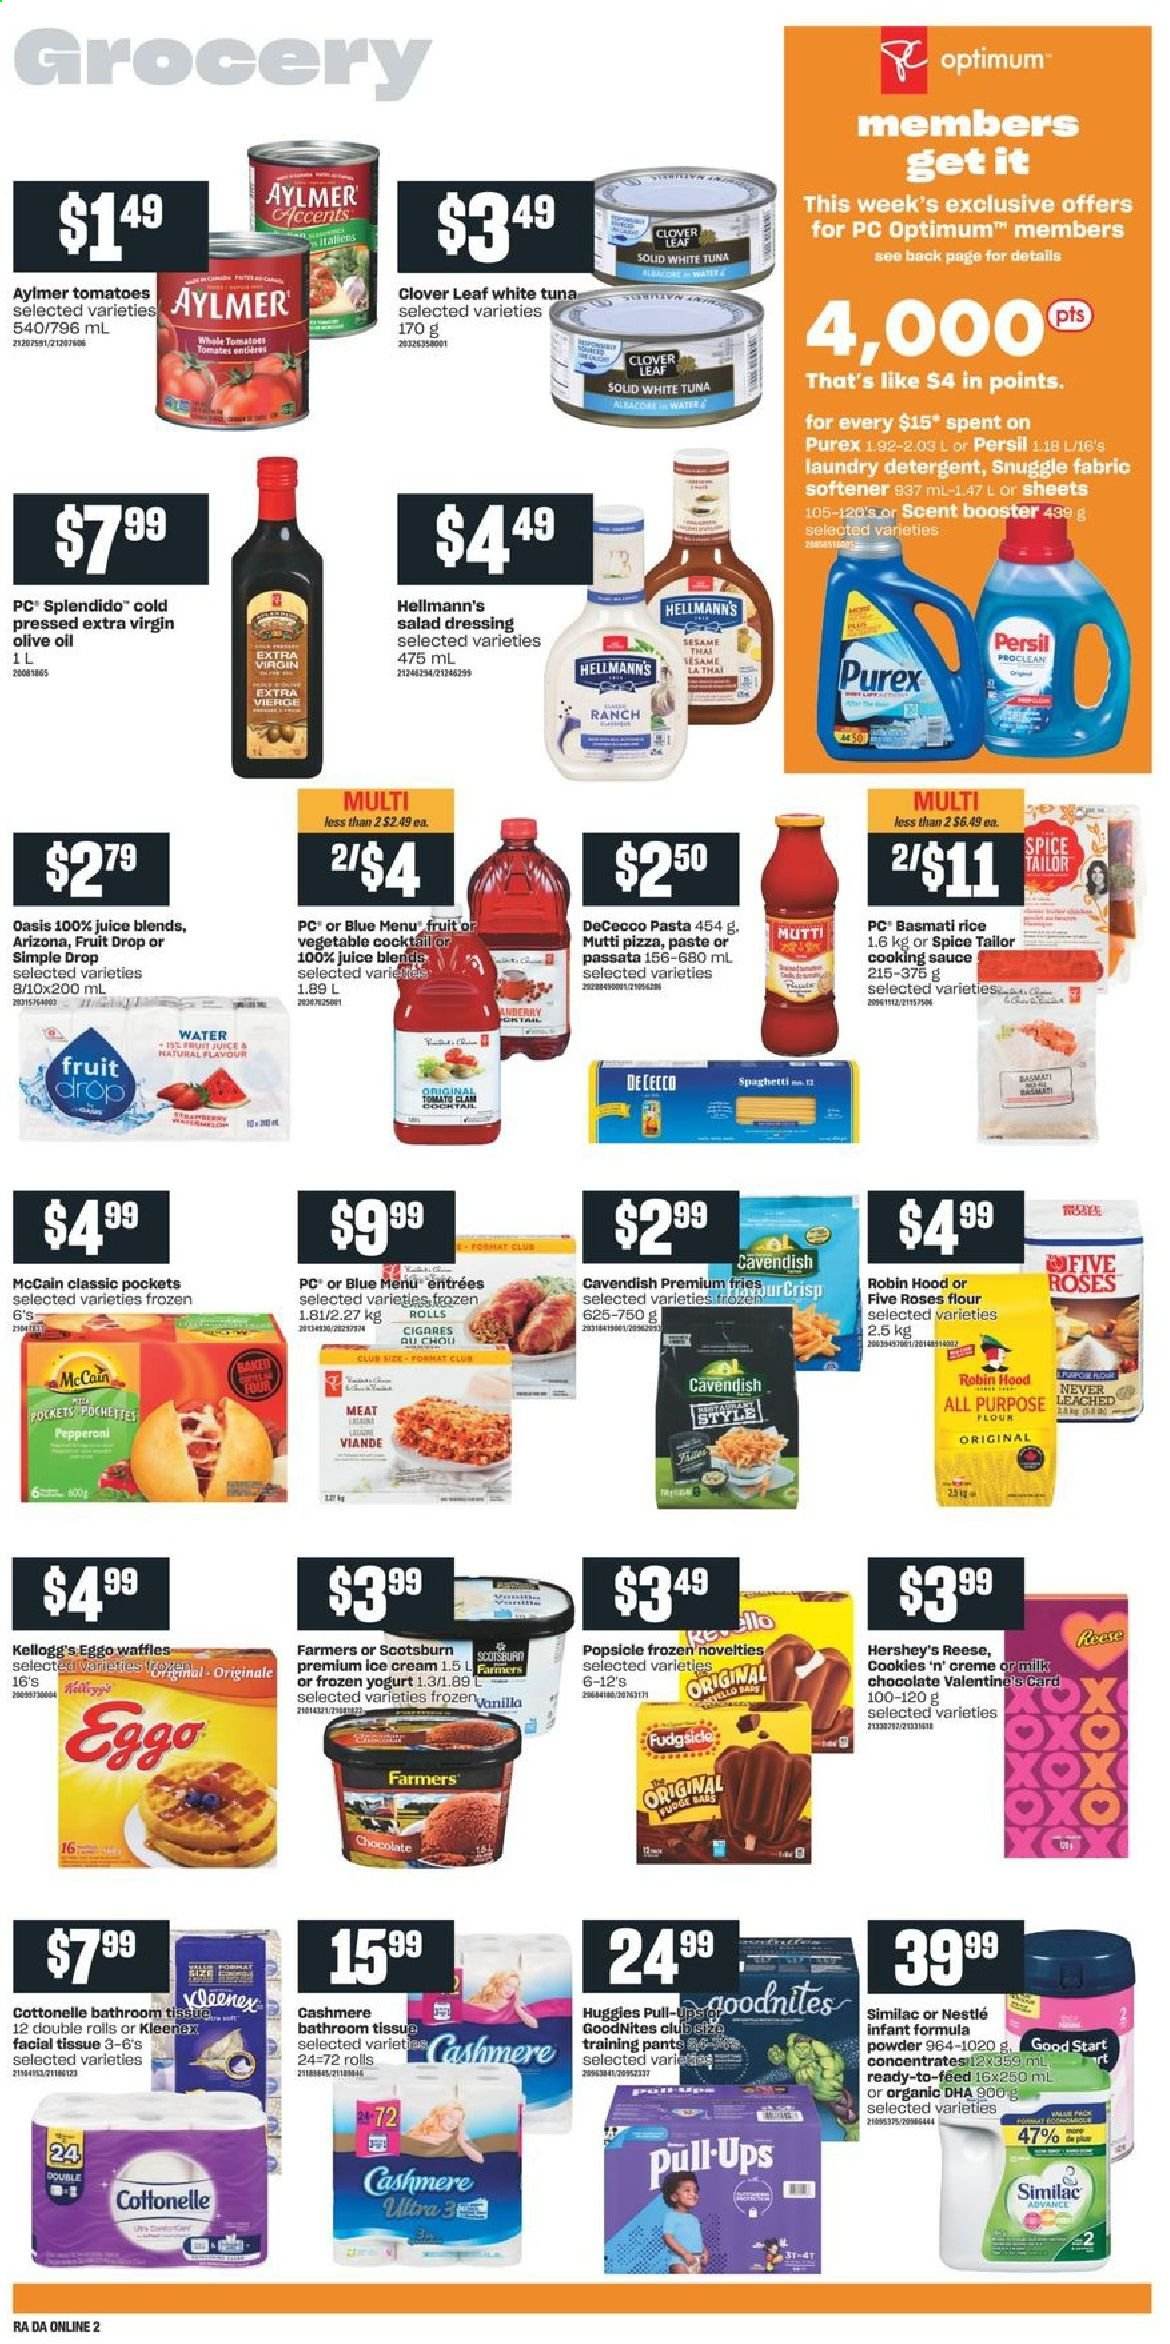 Atlantic Superstore flyer  - February 11, 2021 - February 17, 2021. Page 6.